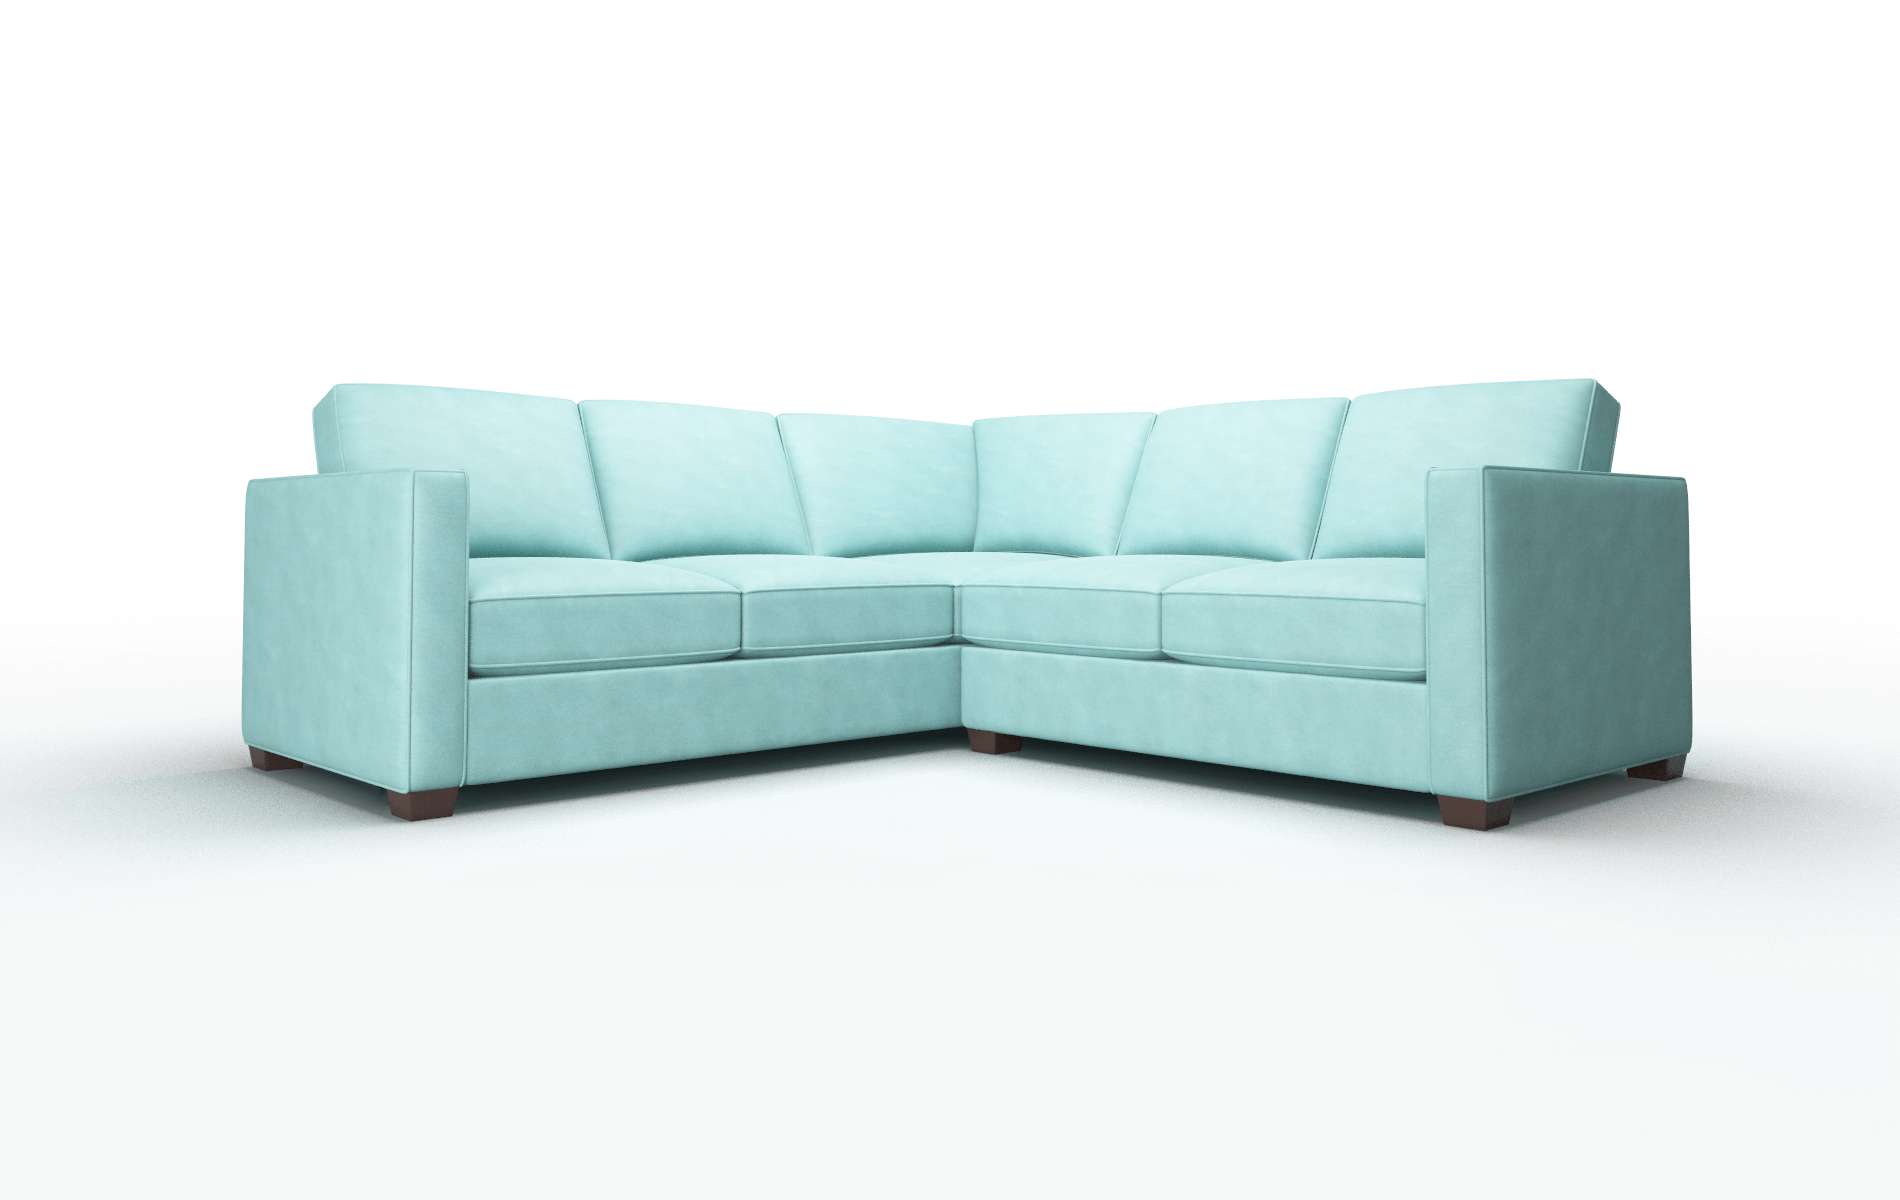 Calgary Curious Turquoise Sectional espresso legs 1